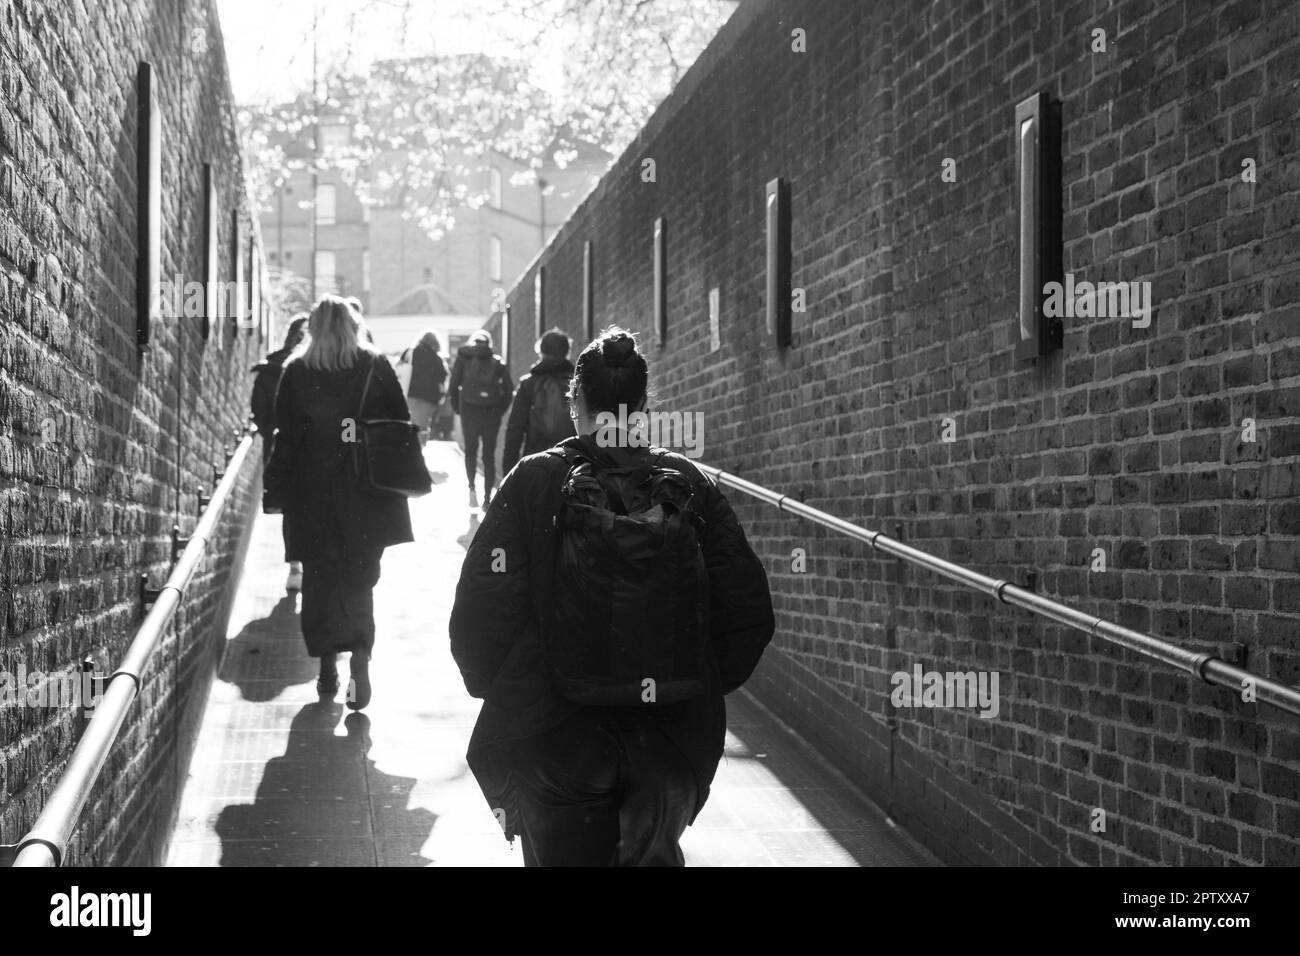 London, UK, 25 April 2023: At Pimlico tube station people walk up the ramp to exit the station on their way to work. Sunshine beams down on them and spring leaves on a tree can be seen in the distance. Anna Watson/Alamy Stock Photo